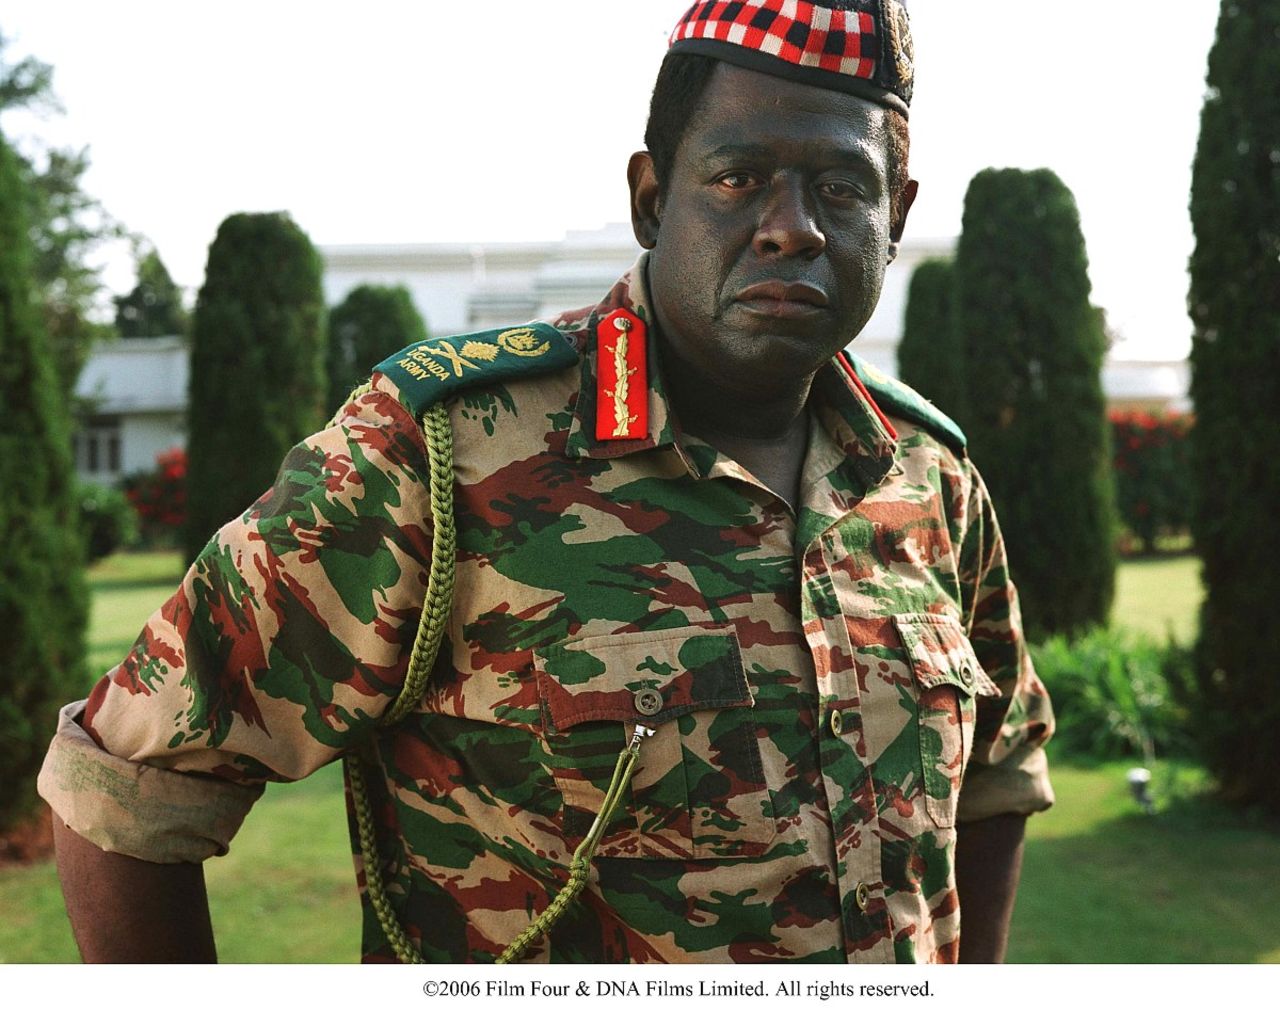 Forest Whitaker's performance as Ugandan dictator Idi Amin in "The Last King of Scotland" brought him a best actor Academy Award, Golden Globe and BAFTA Award.